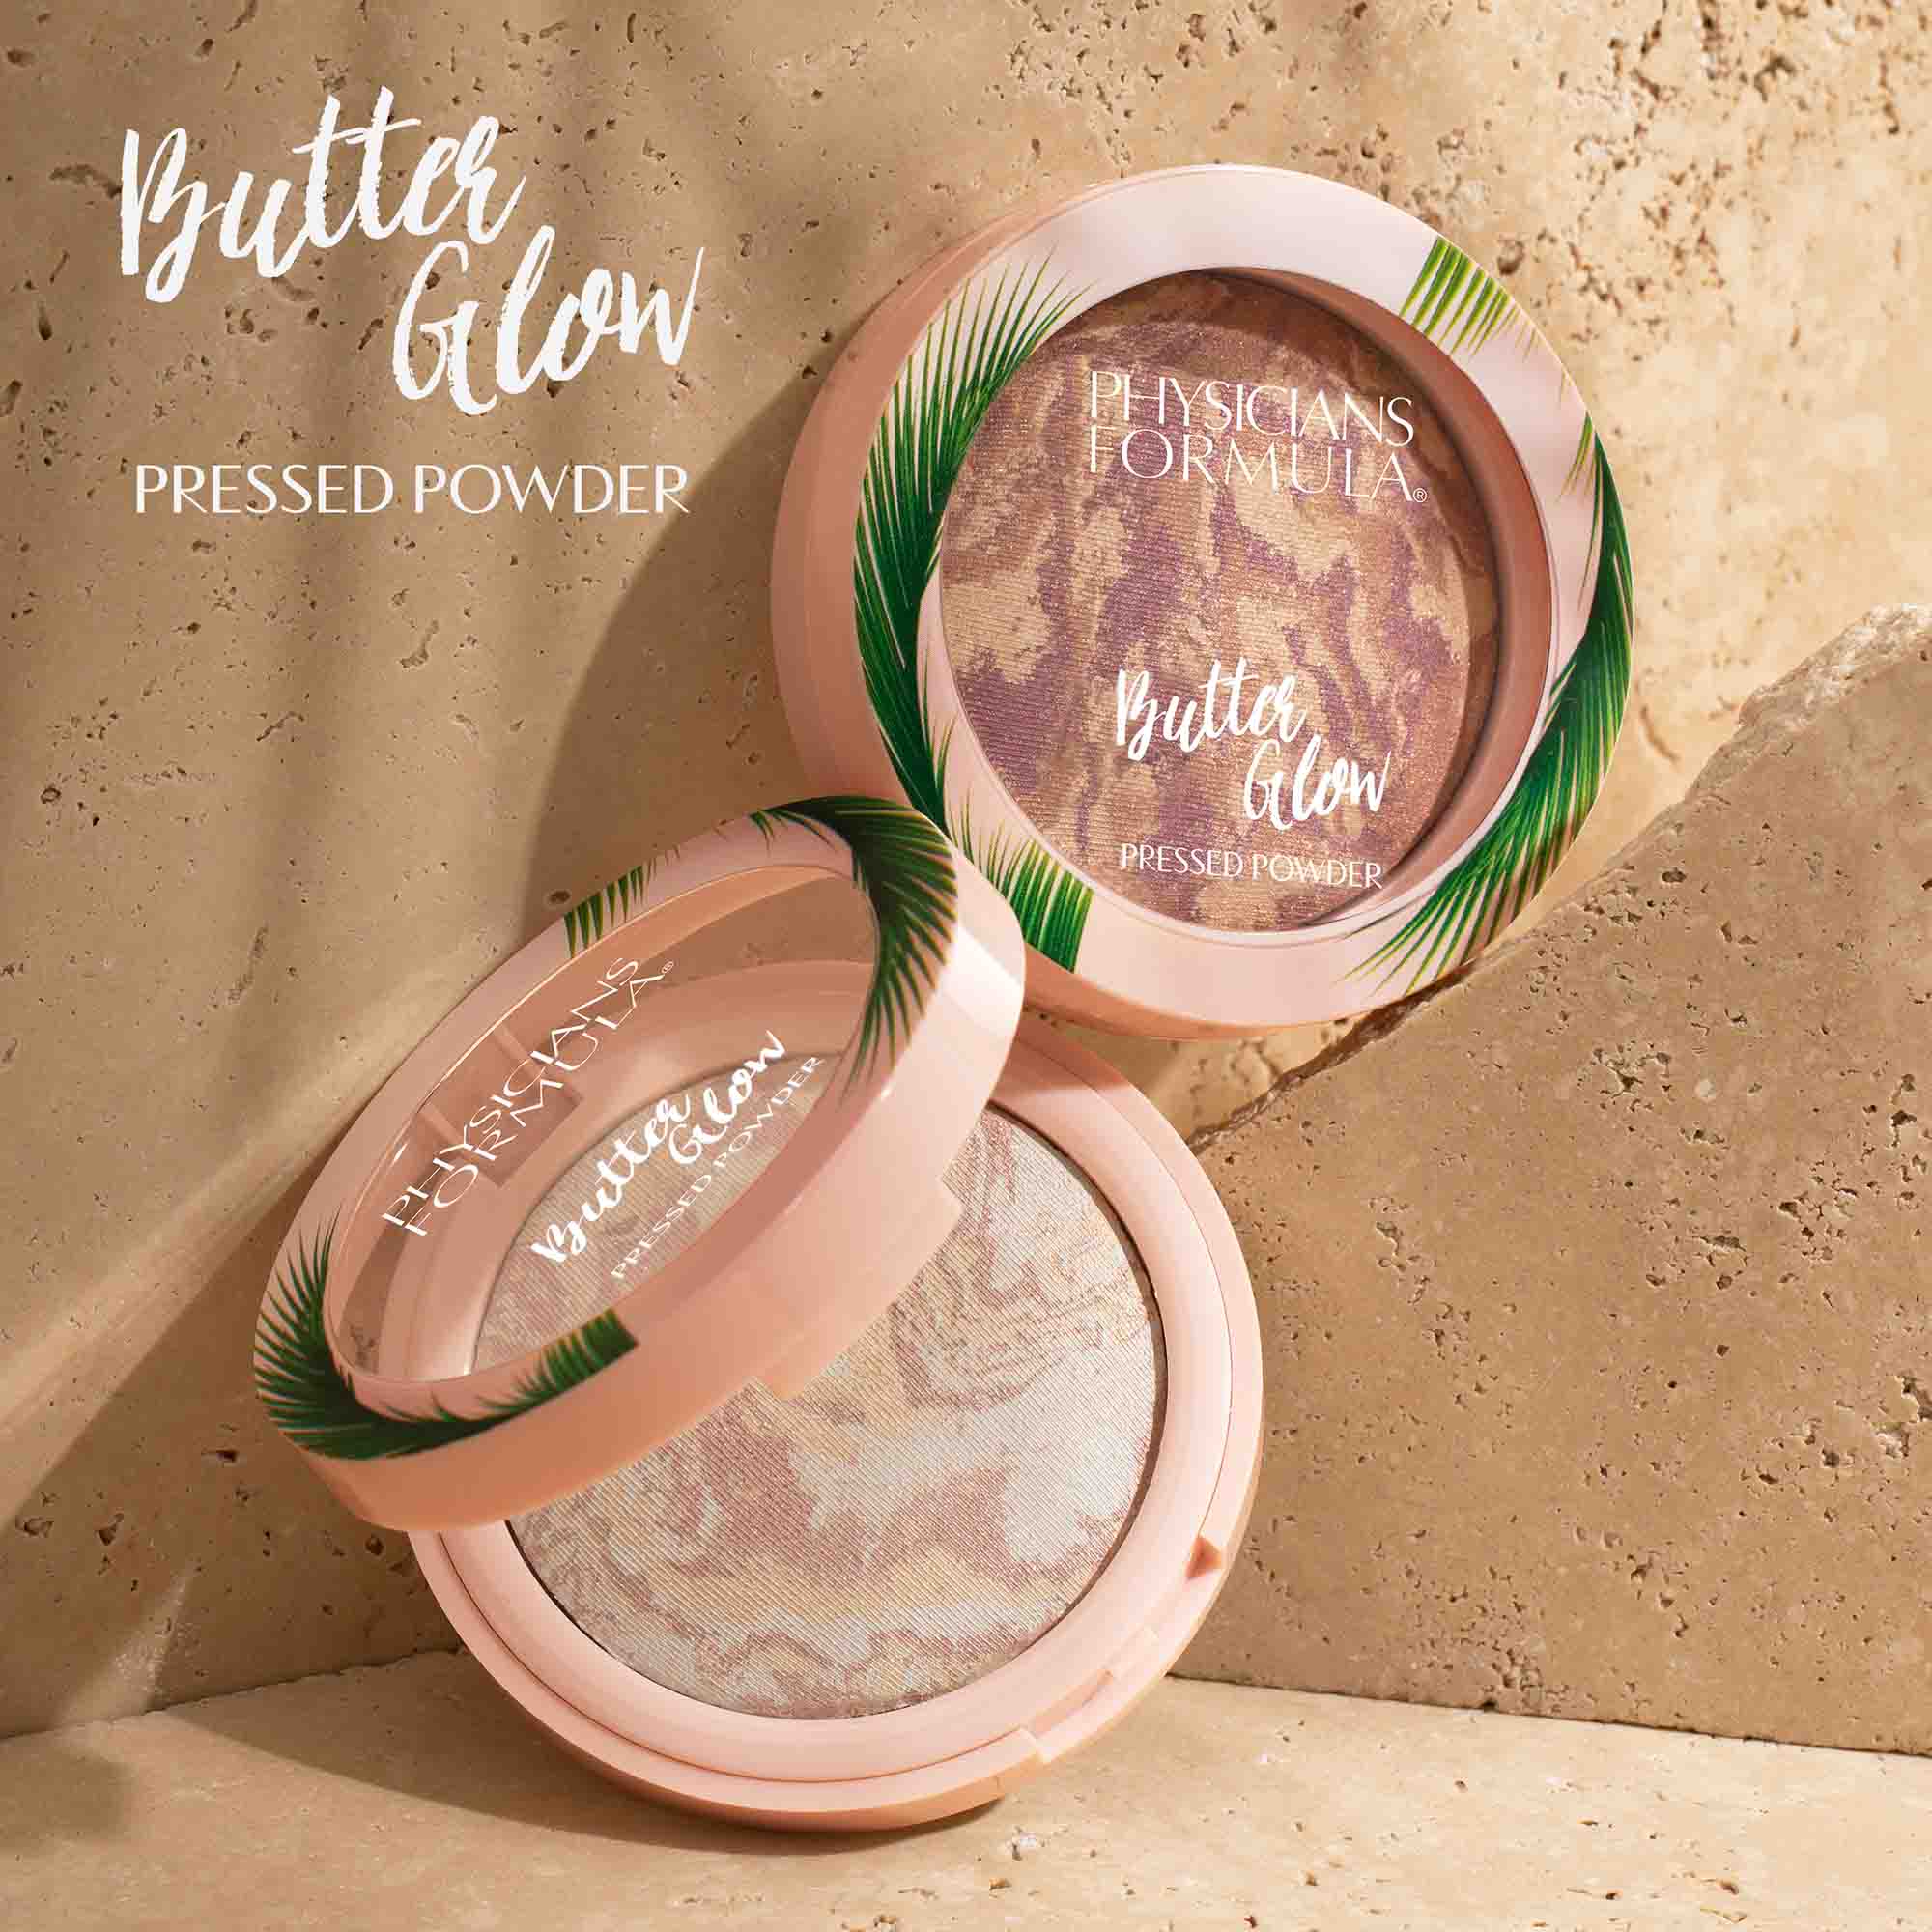 Physicians Formula  Butter Glow Pressed Powder